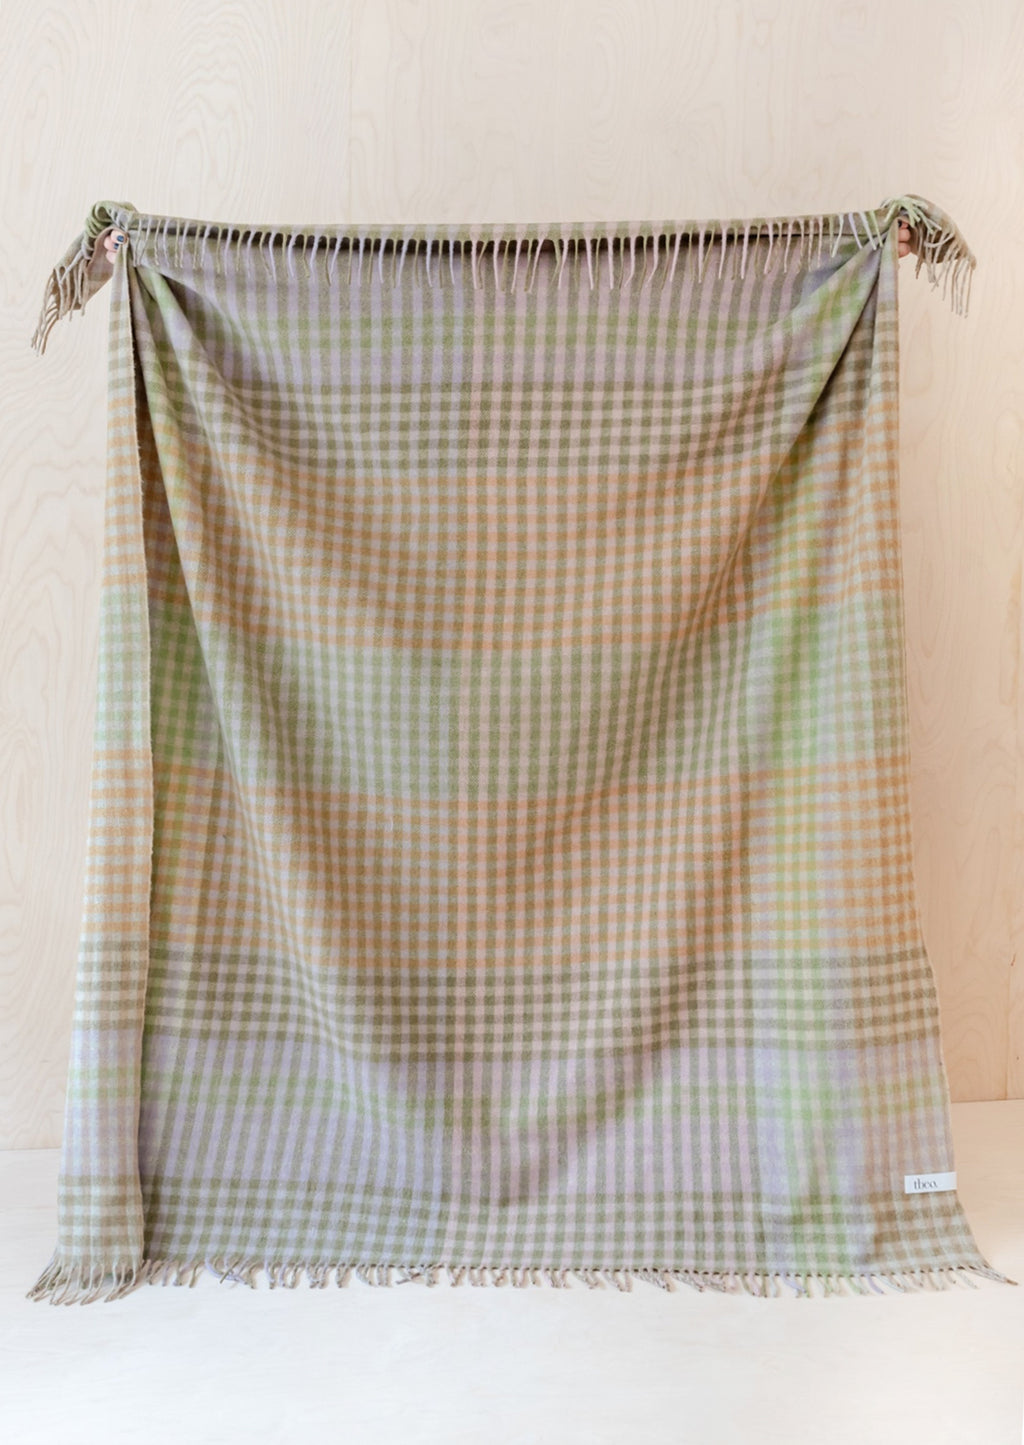 1: A gingham check print throw in mix of pastel and earthy greens and browns.